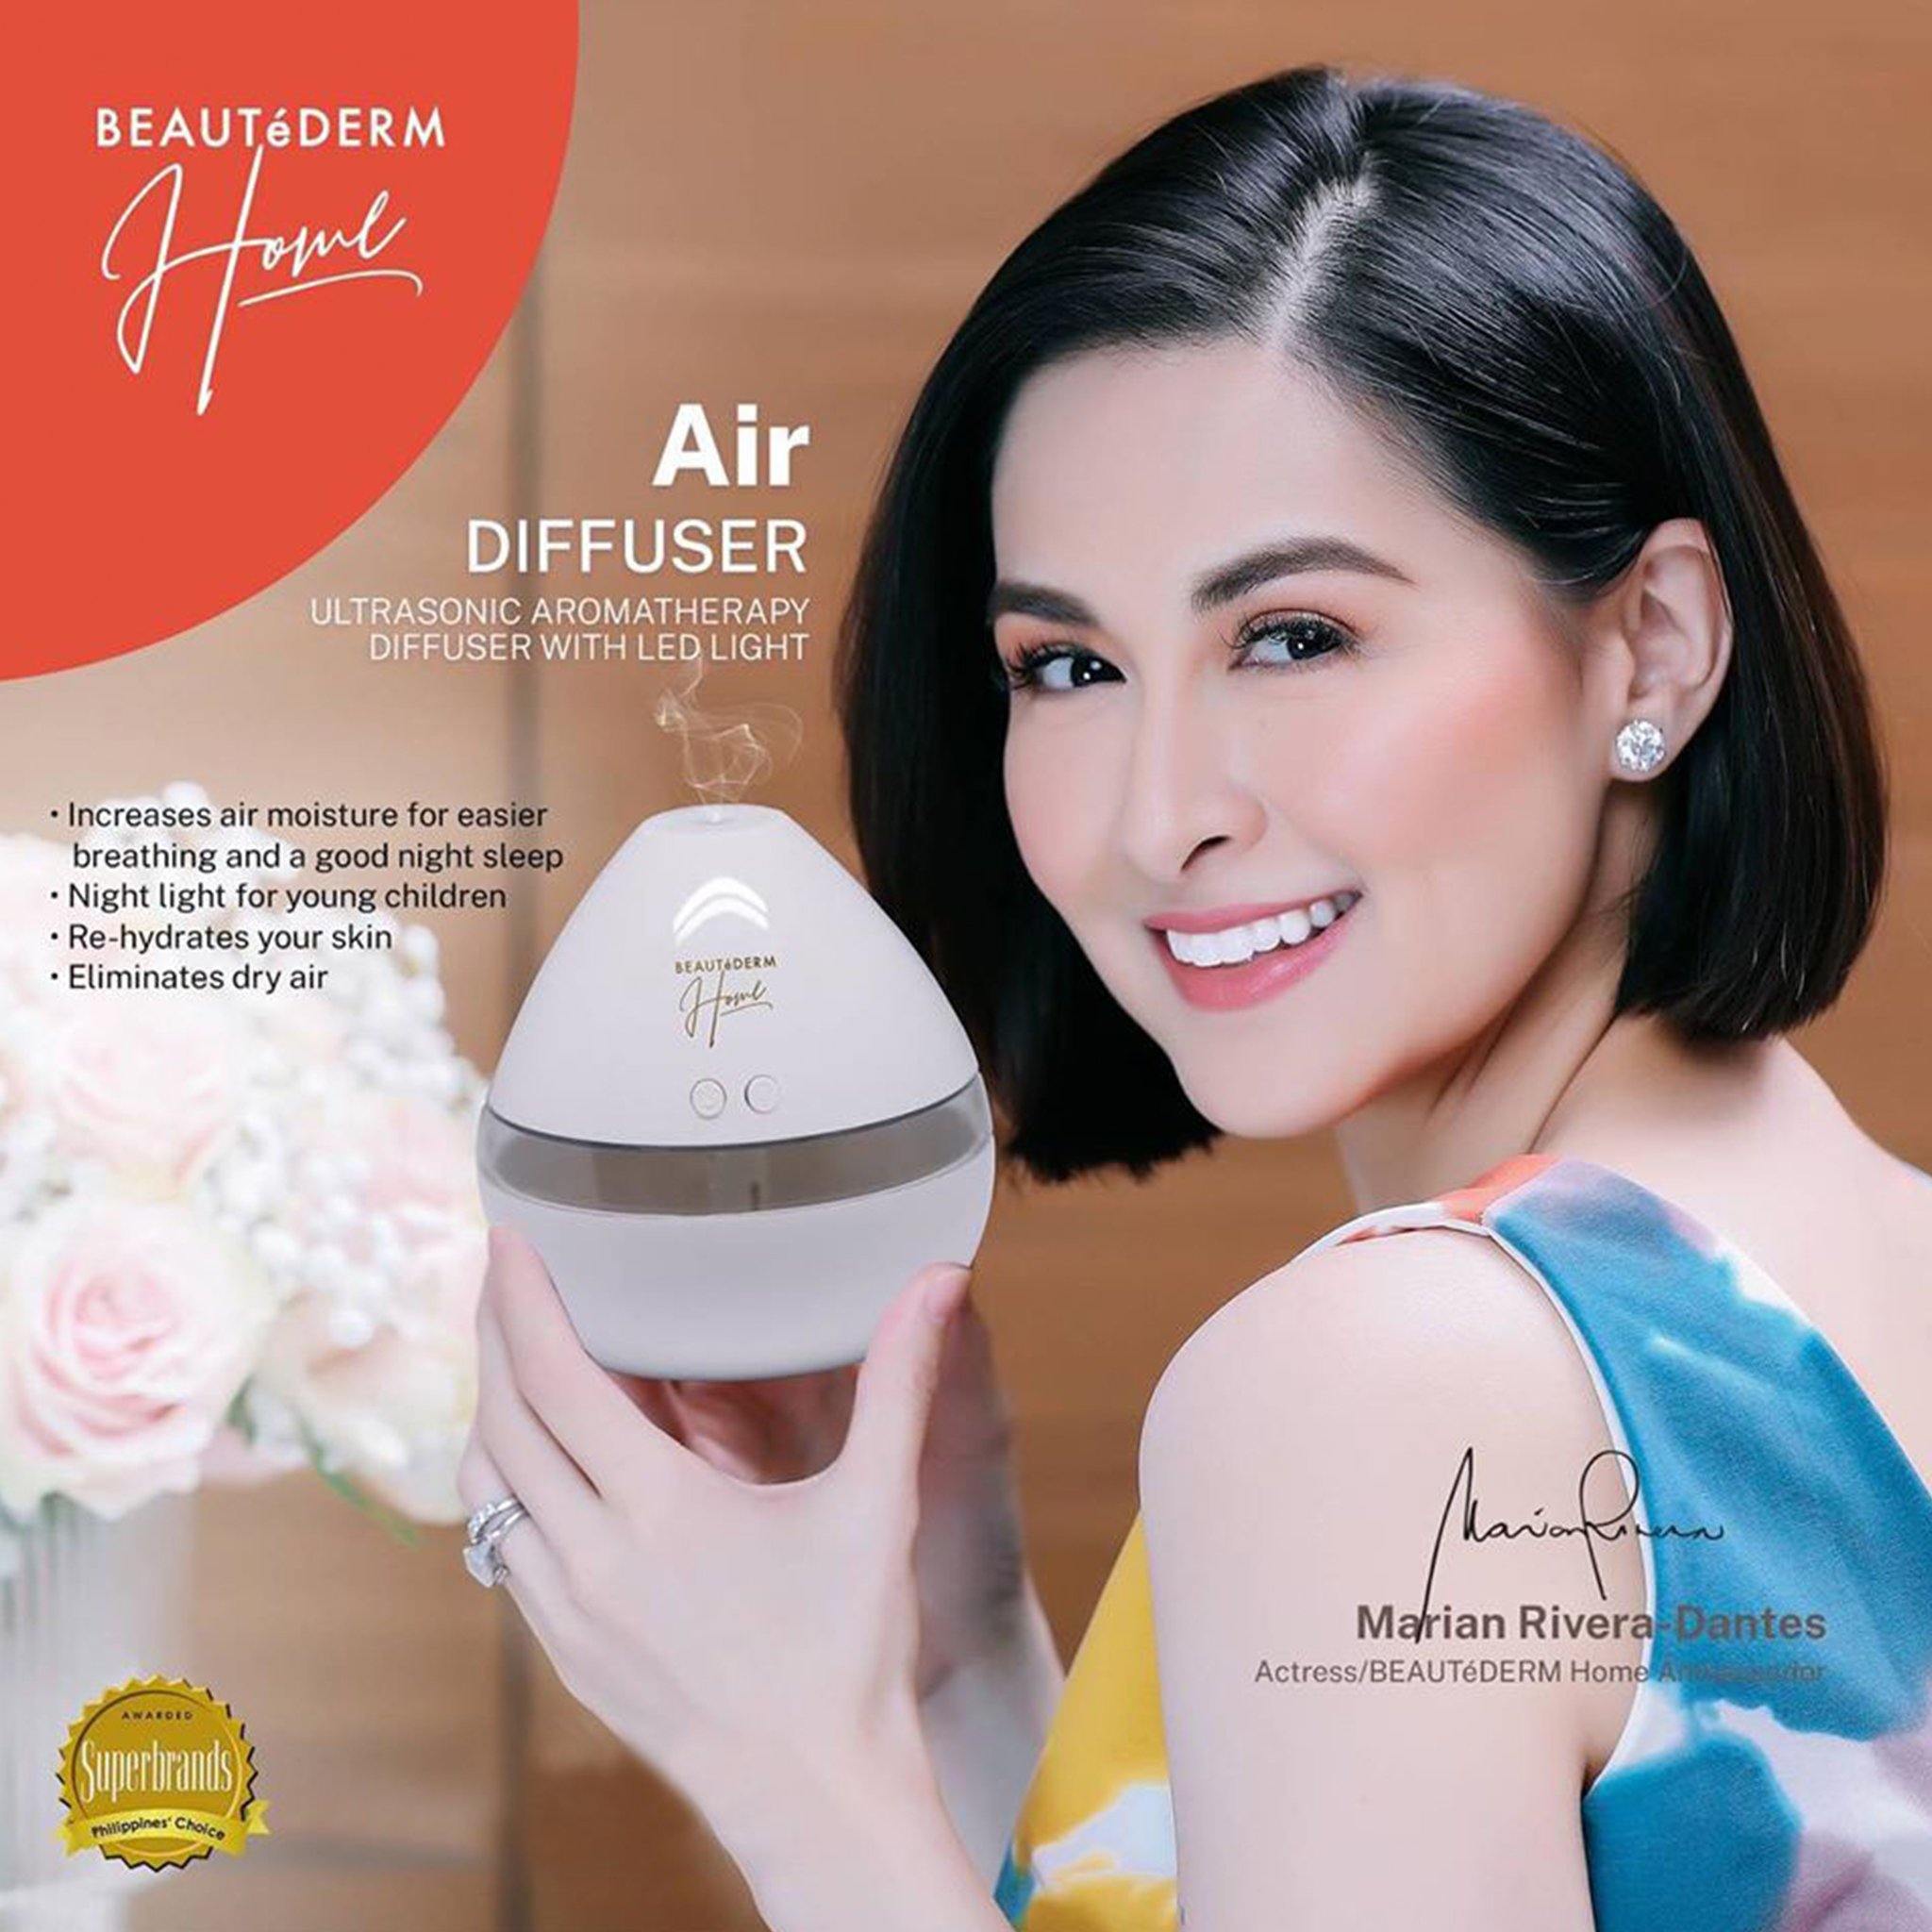 Beautederm Air Diffuser, Ultrasonic Aromatherapy Diffuser with LED Light, Marian Rivera-Dantes